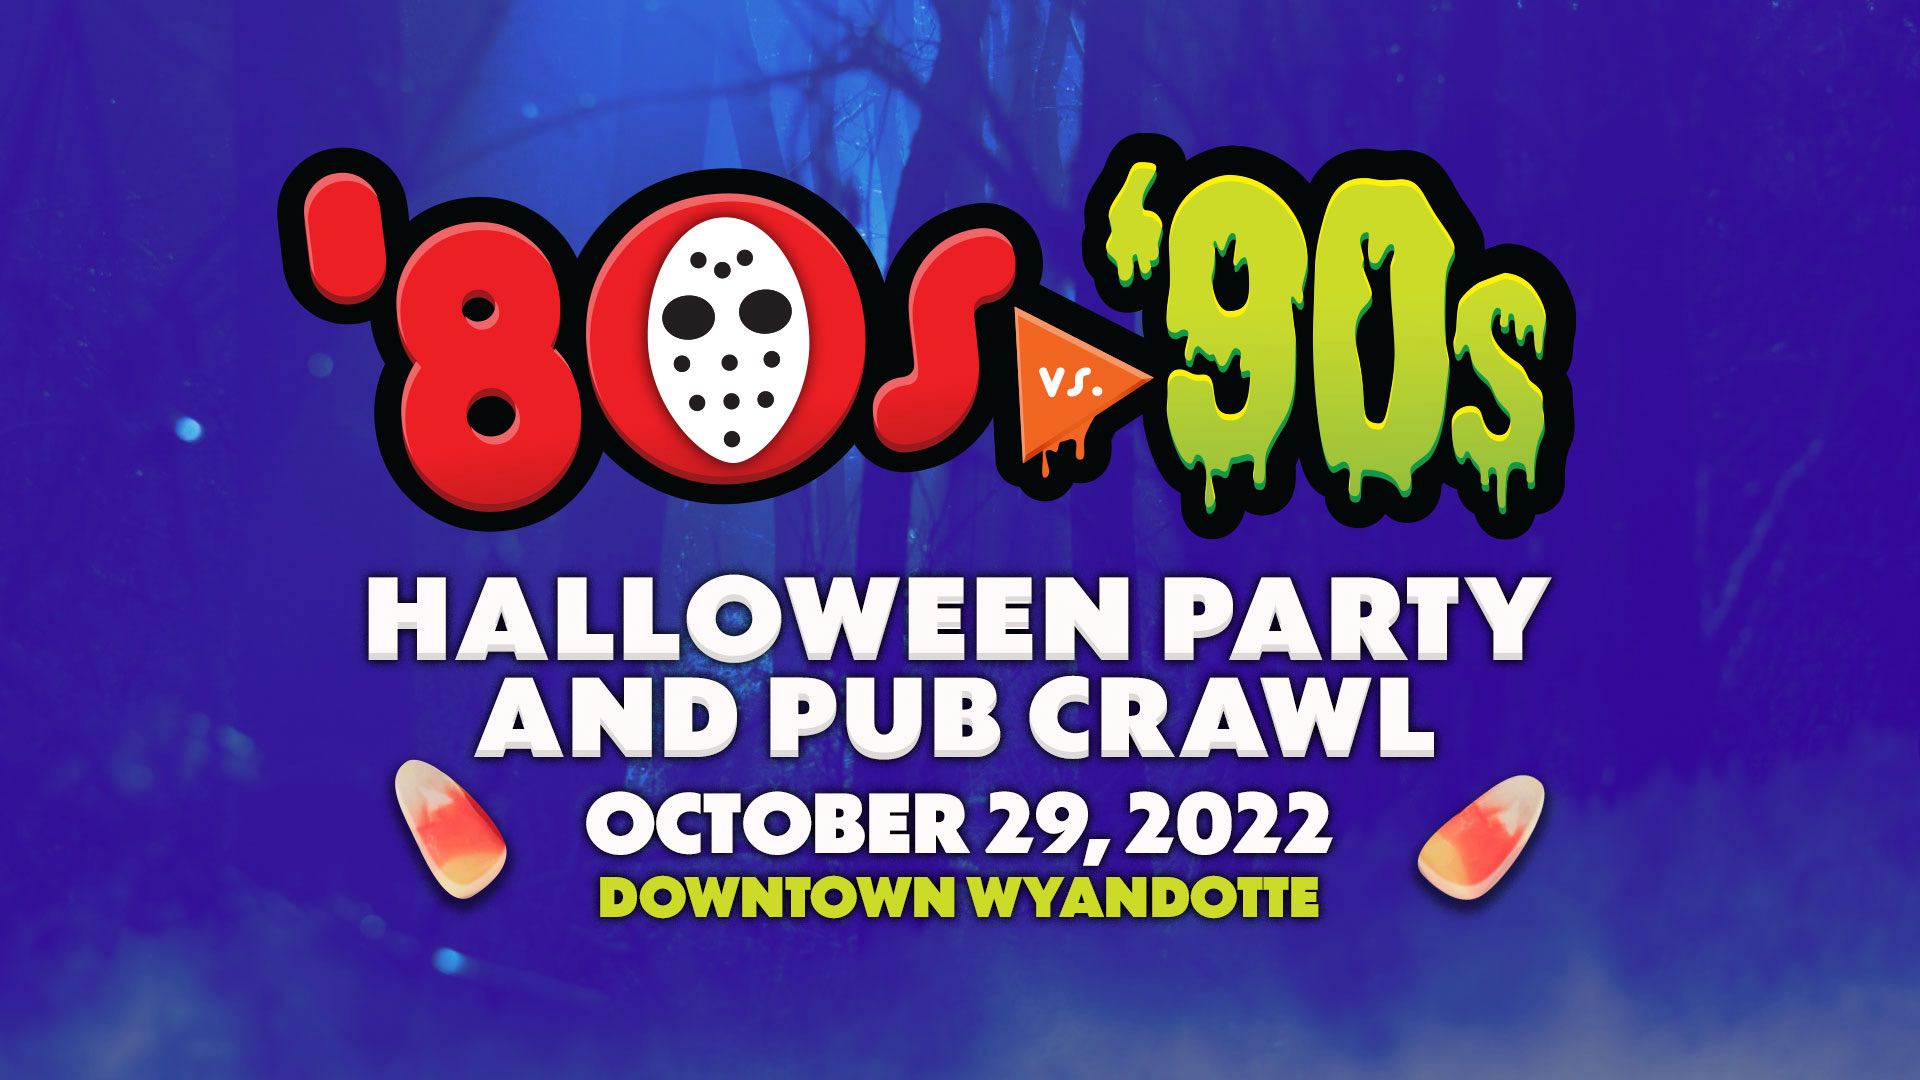 '80s vs. '90s Halloween Party & Pub Crawl, October 29, 2022 in Downtown Wyandotte